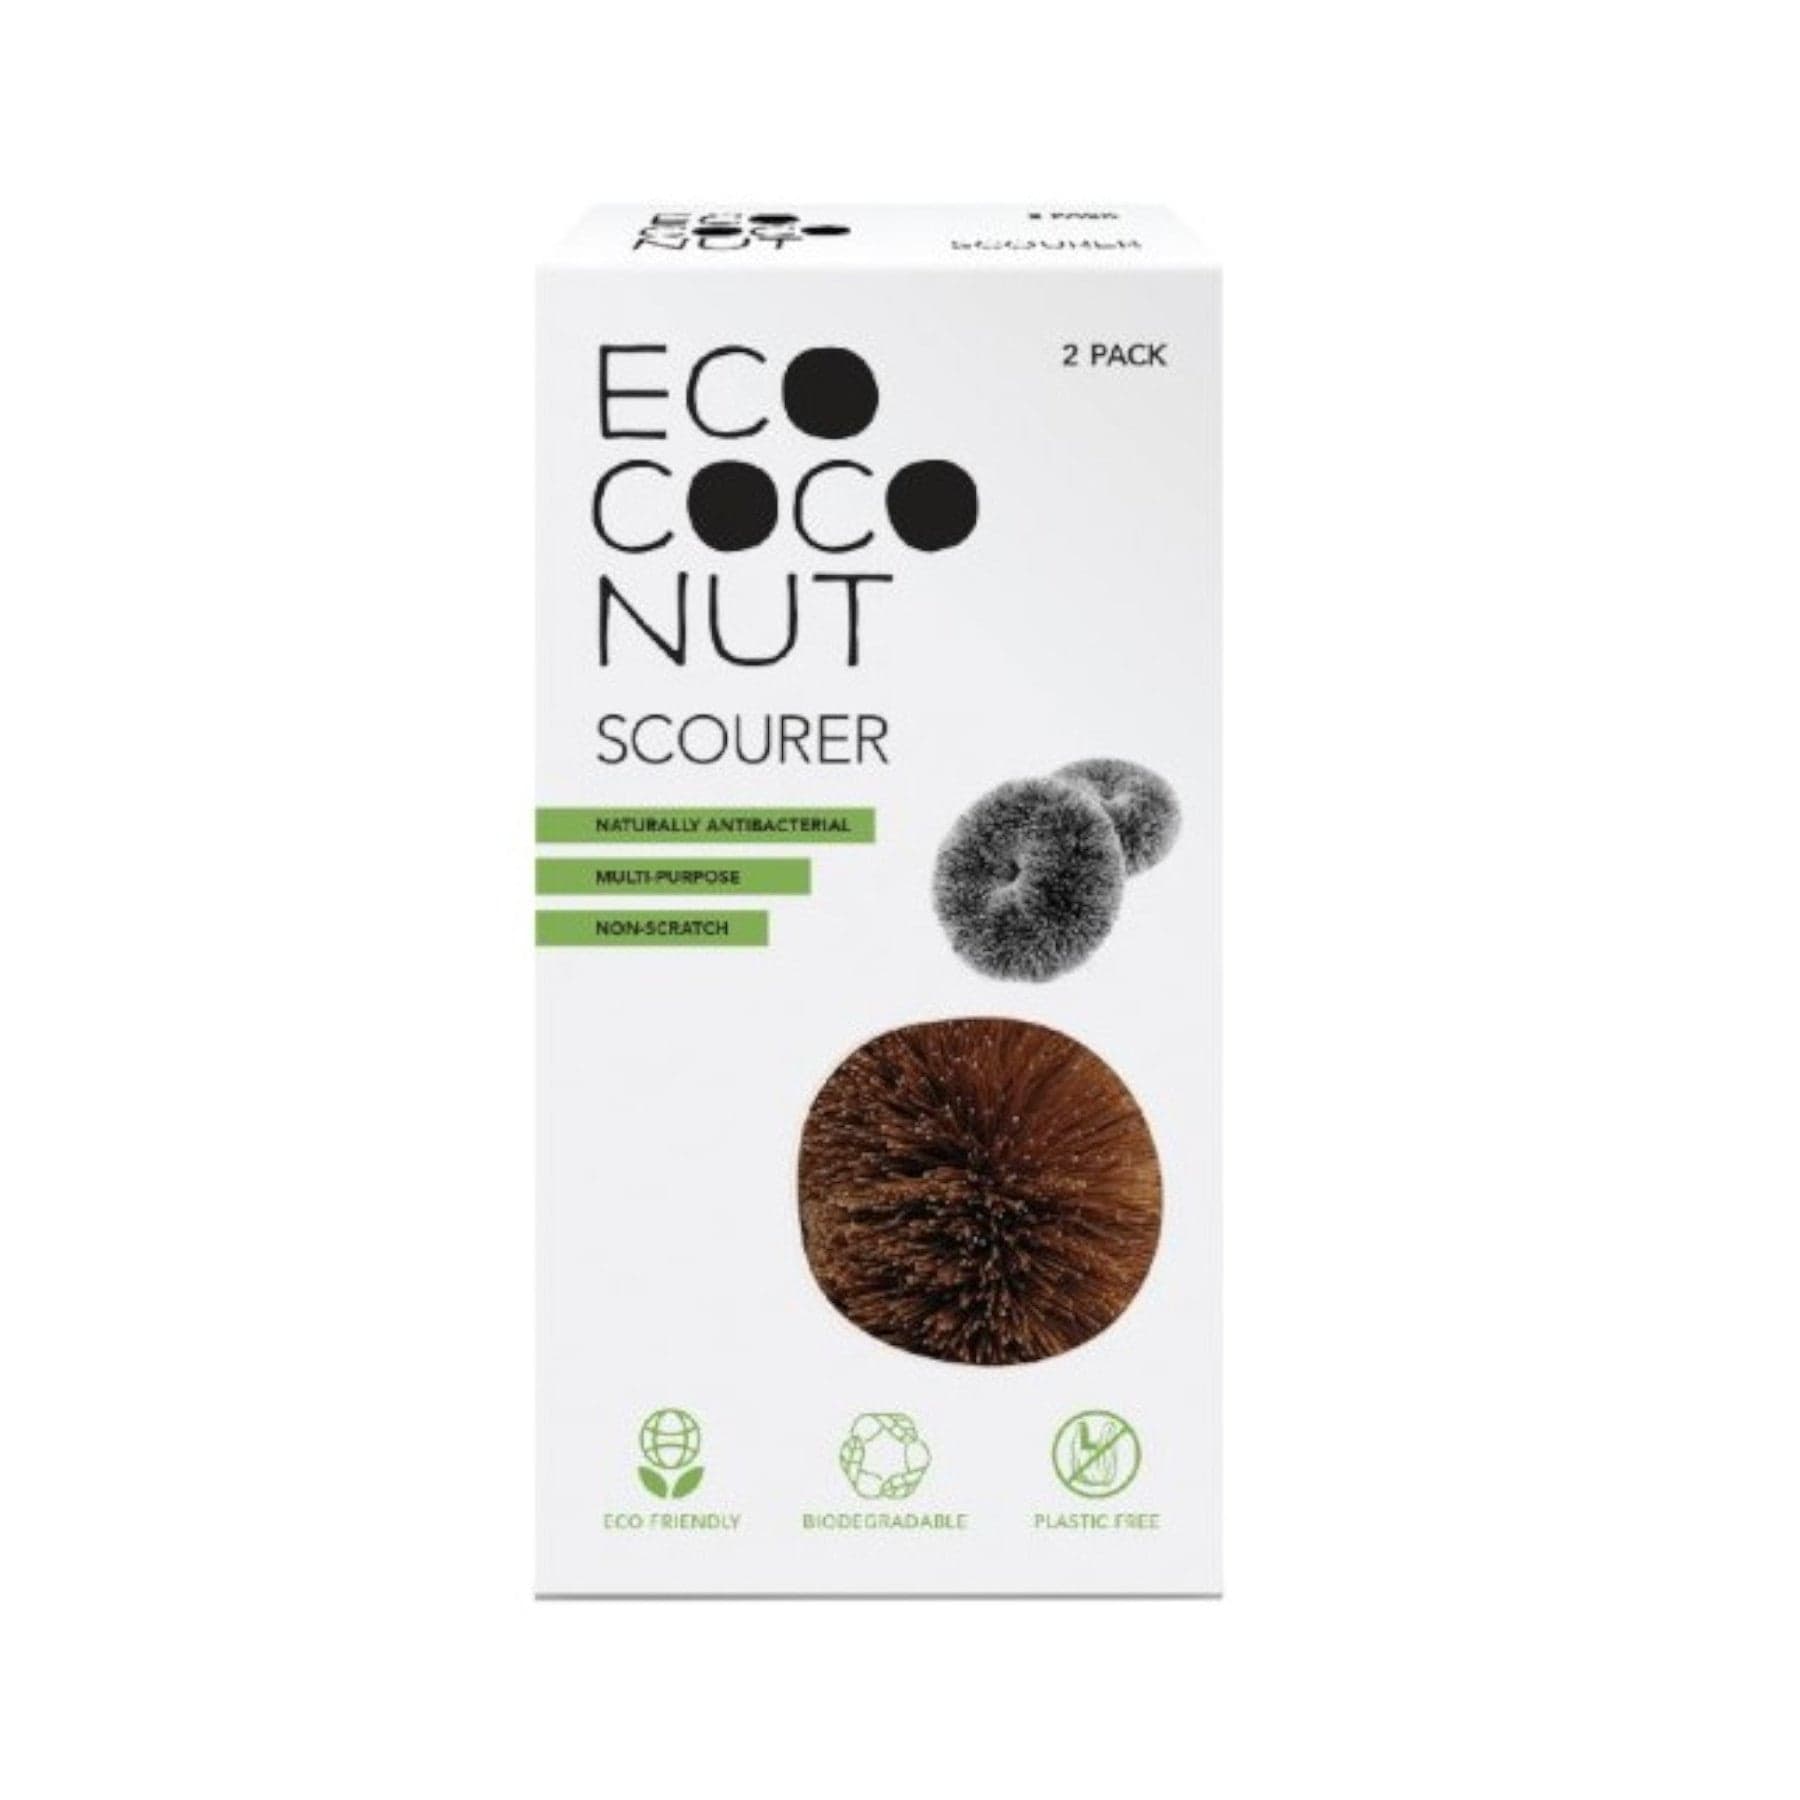 Eco Coconut Scourer packaging, 2-pack natural antibacterial multi-purpose non-scratch scouring pads, biodegradable eco-friendly plastic-free kitchen cleaning supplies.